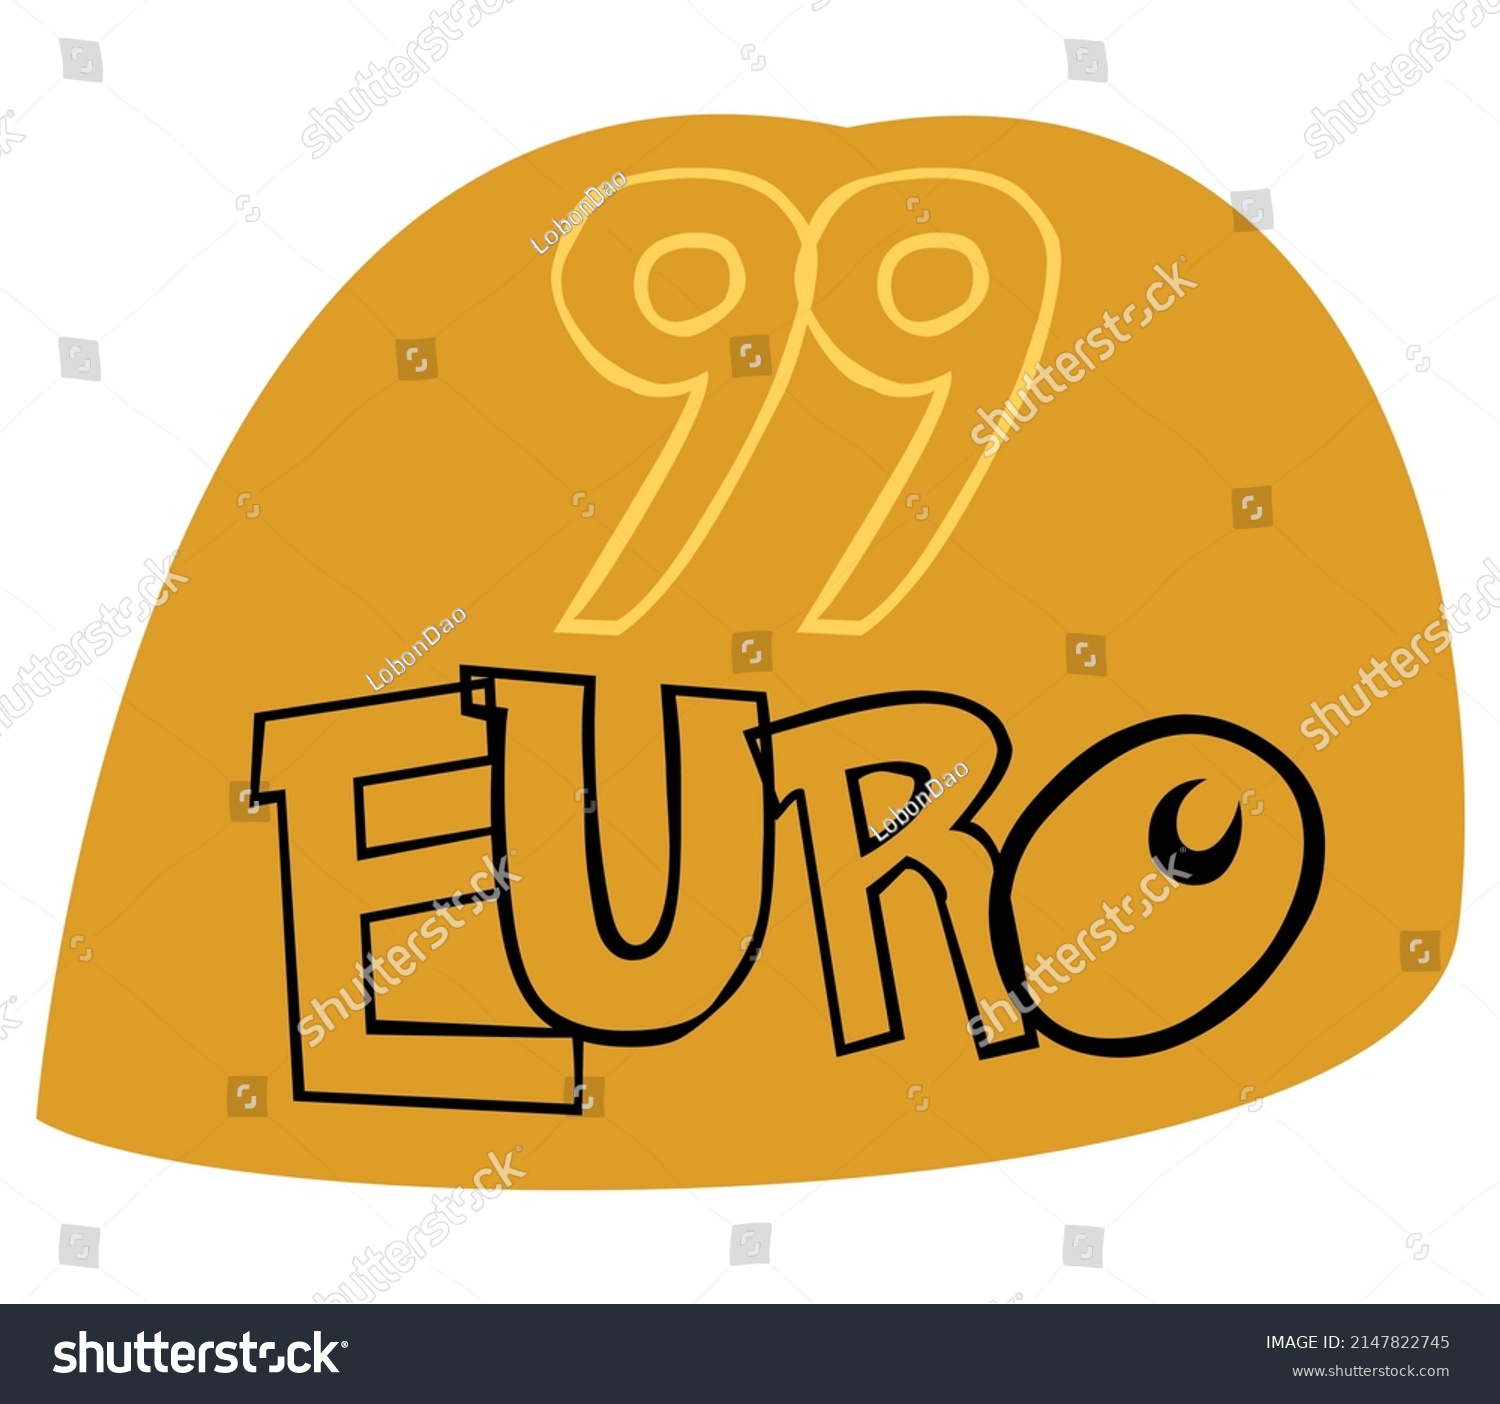 99Euro Symbol in a button mode, 2d vector illustration #2147822745